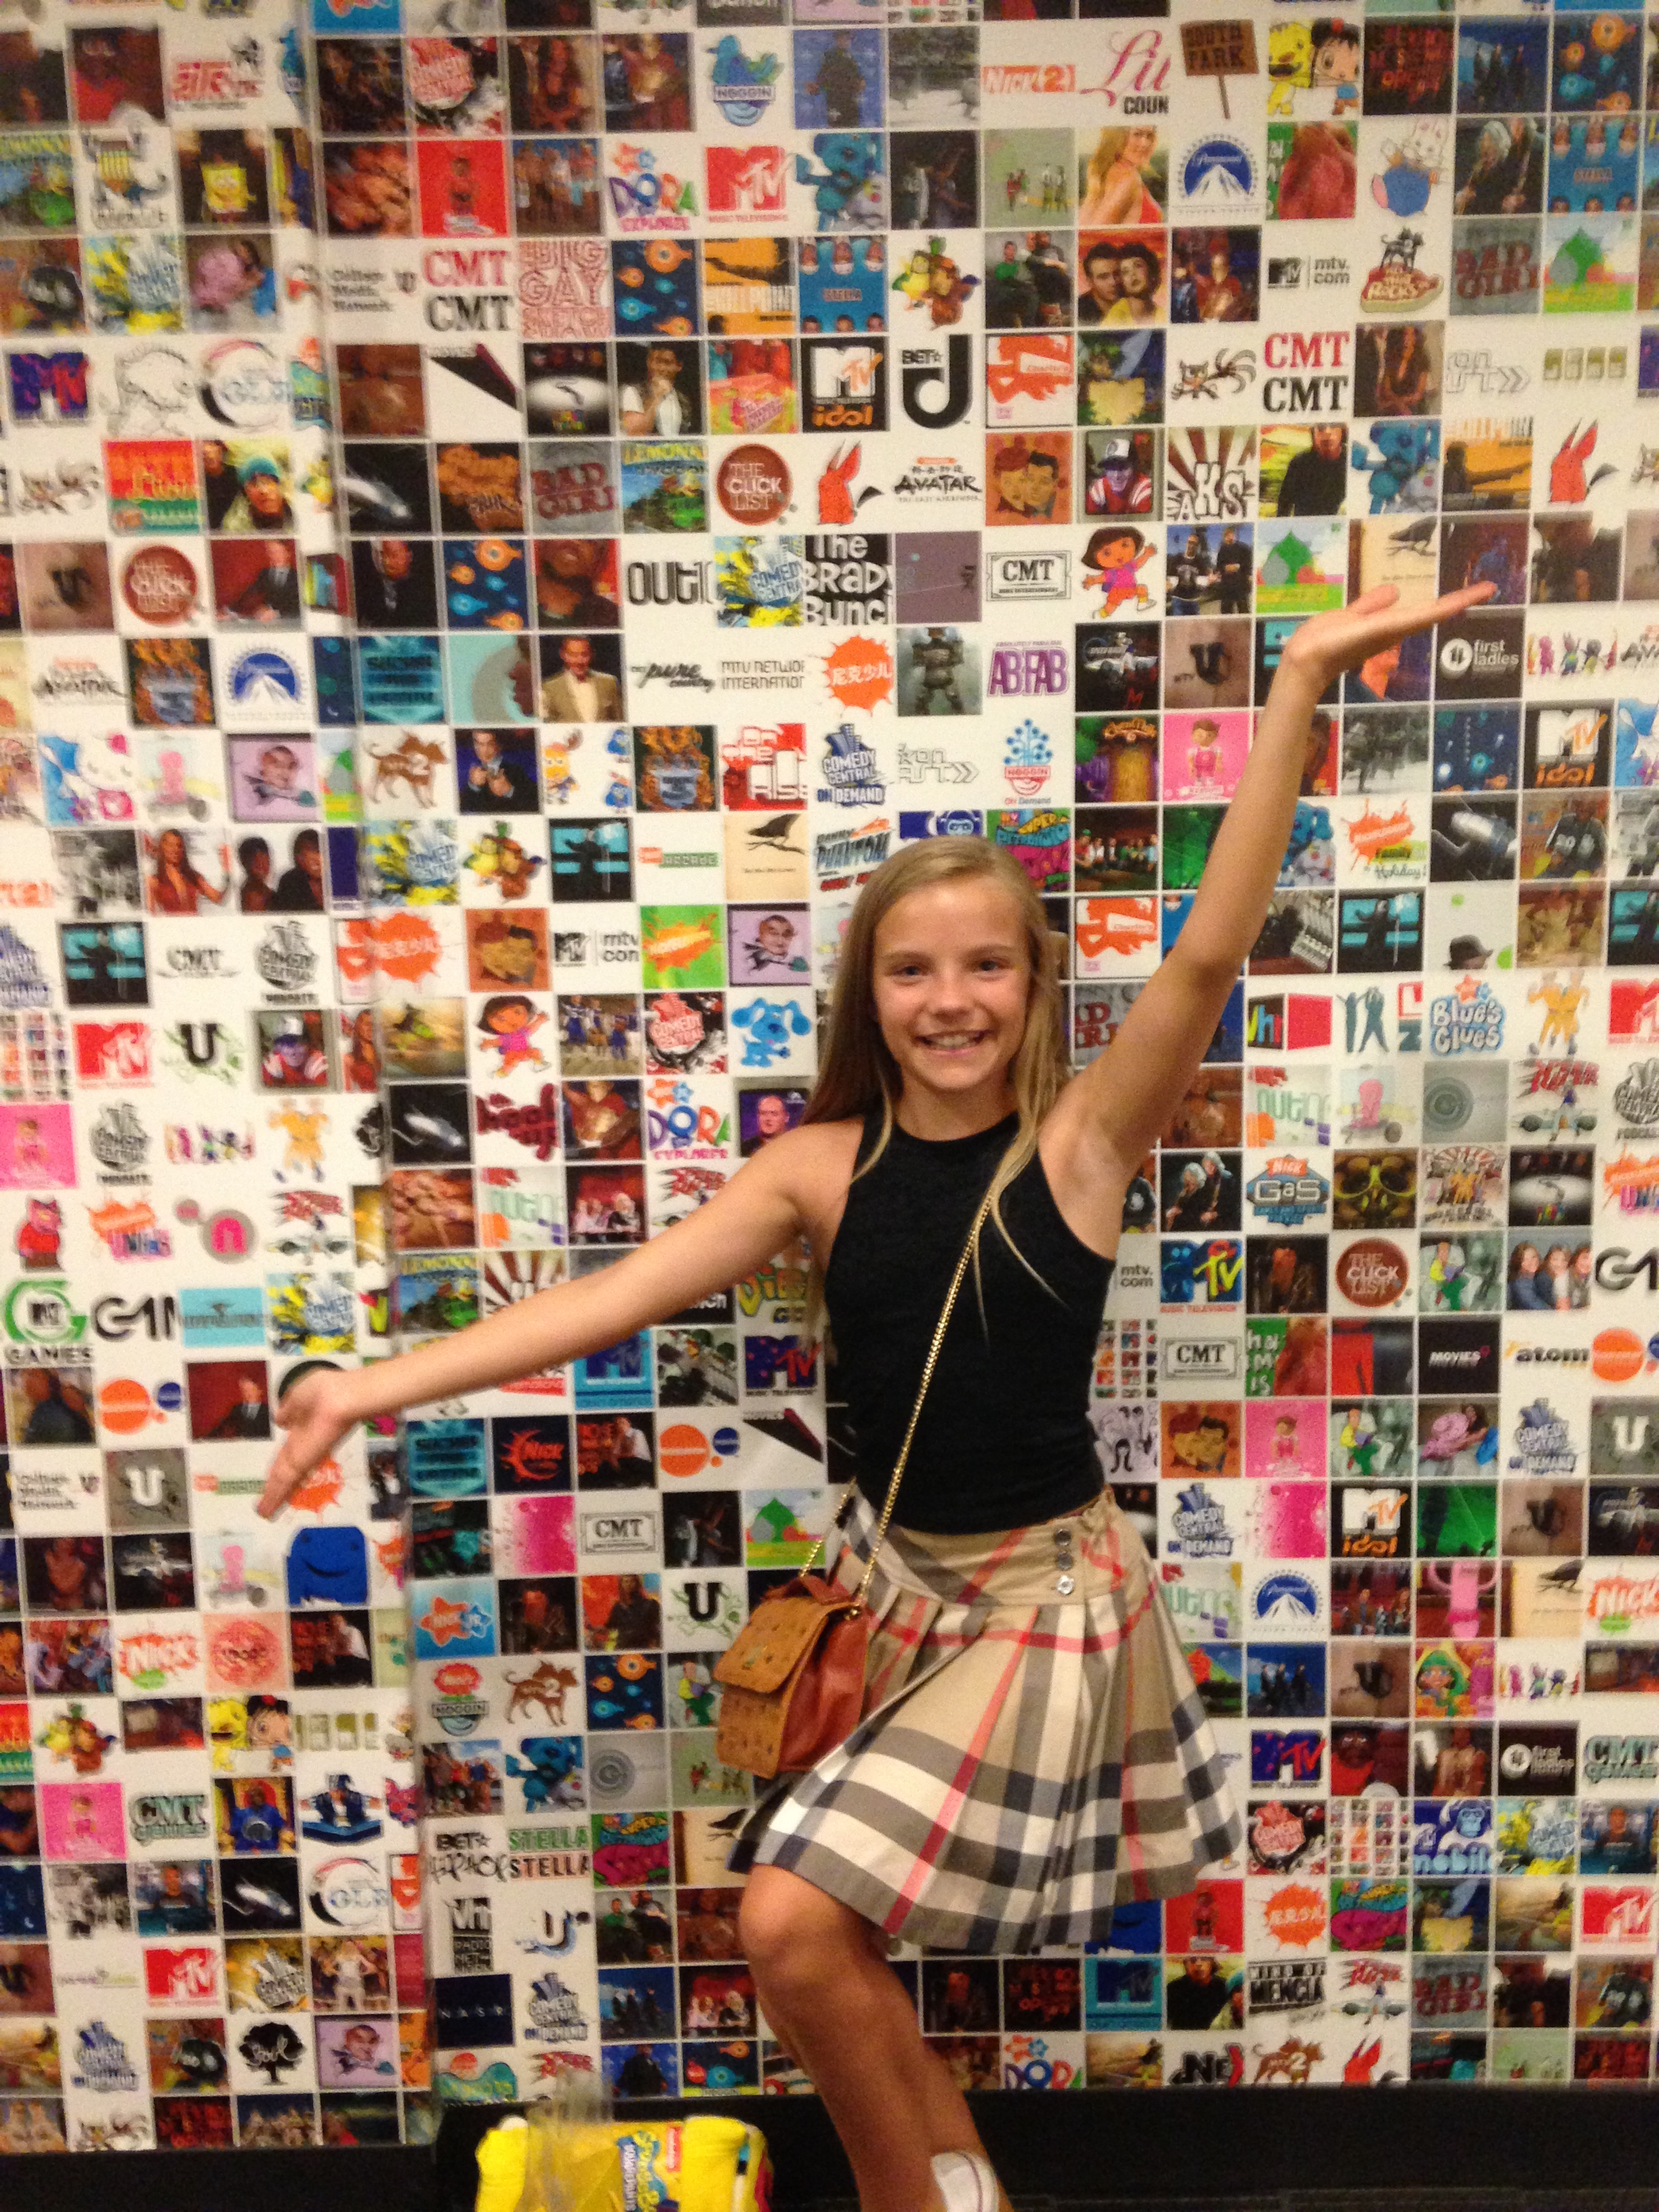 Meg at Viacom visiting the Nickelodeon offices, WIT's Academy.